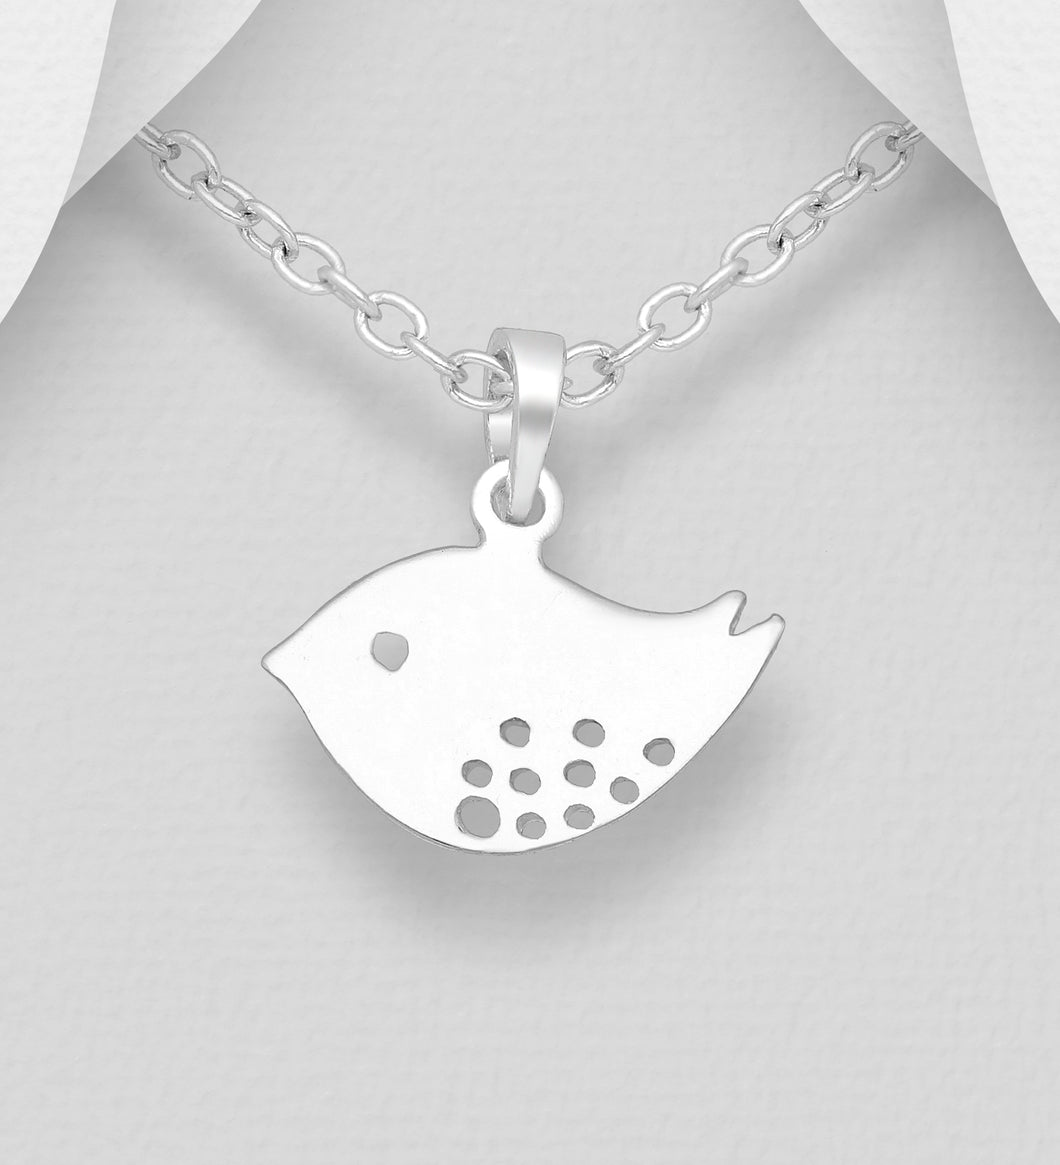 silver bird necklace, gifts for ladies, gifts for girls, gifts for the wife, silver jewellery gifts, small silver jewellery gifts